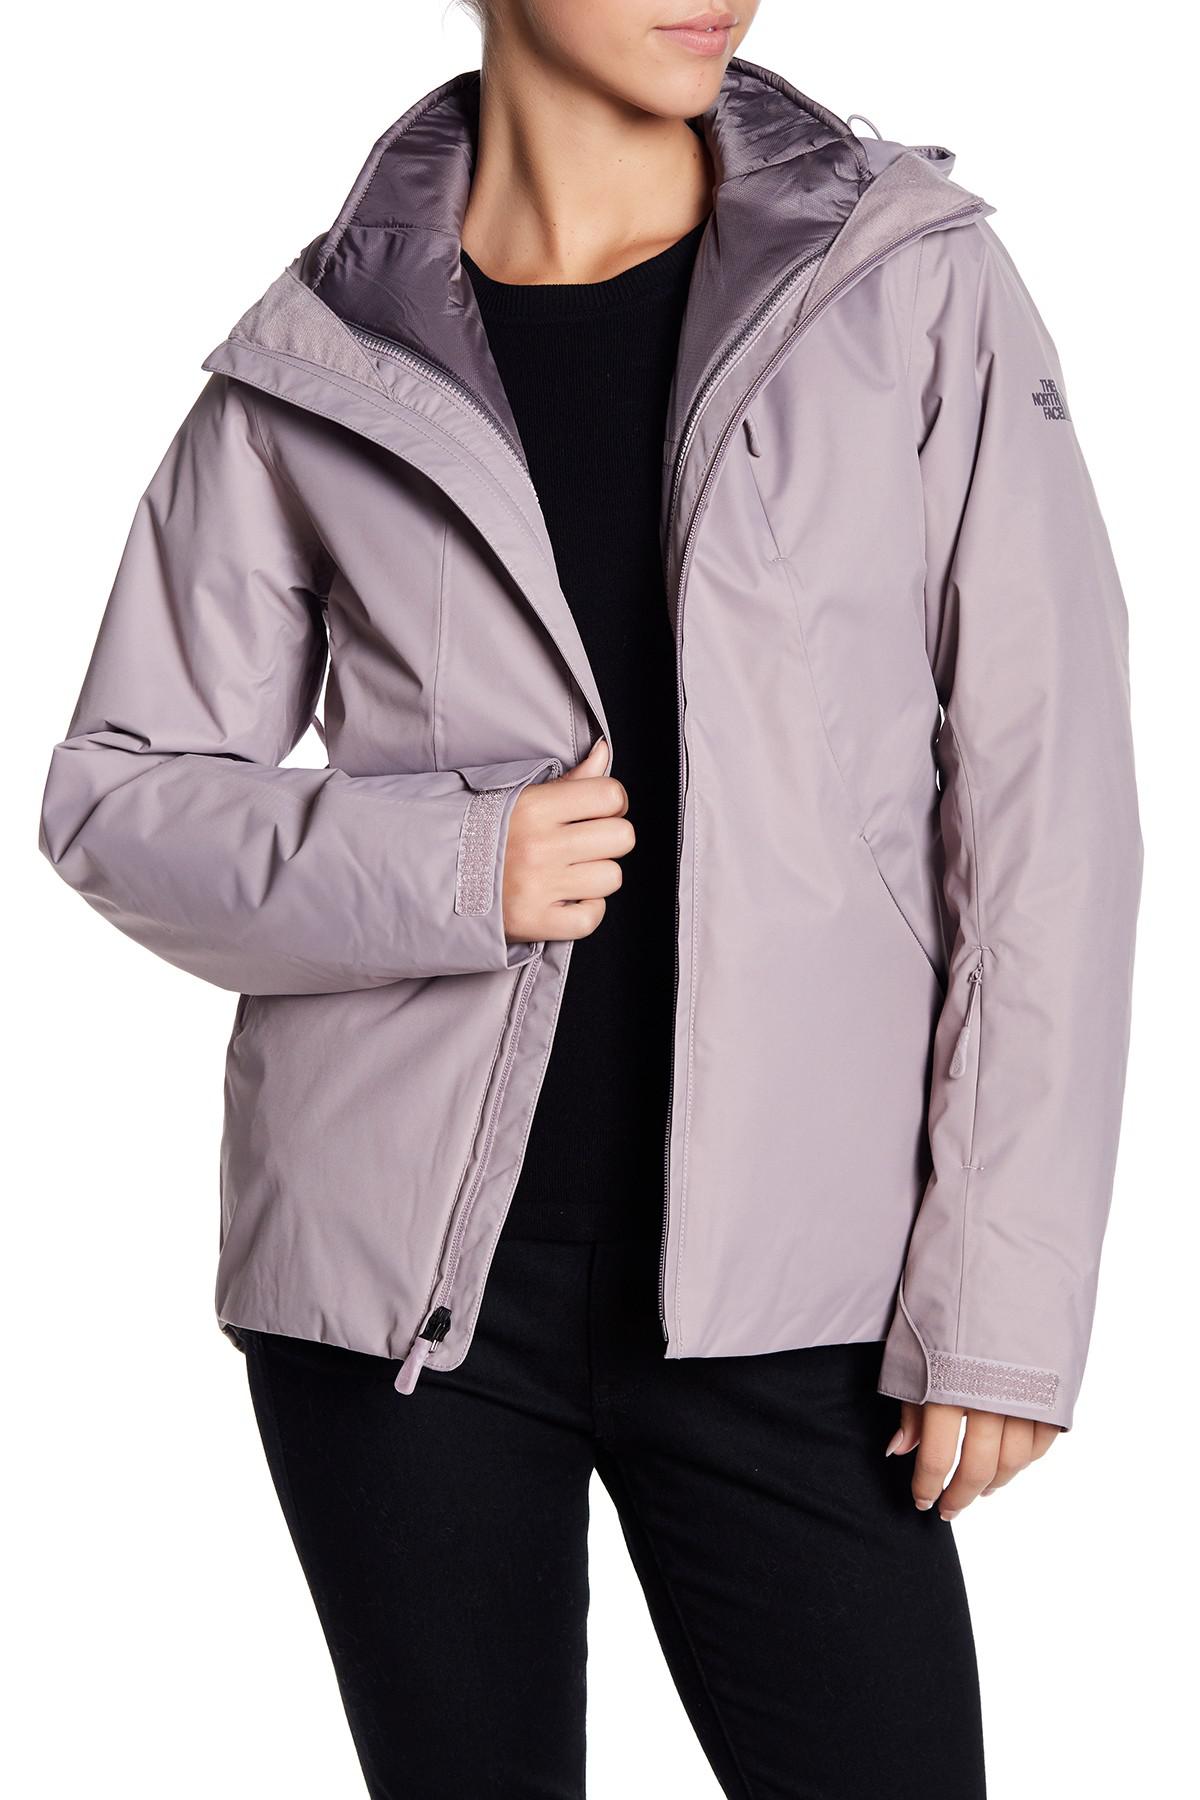 north face clementine triclimate jacket